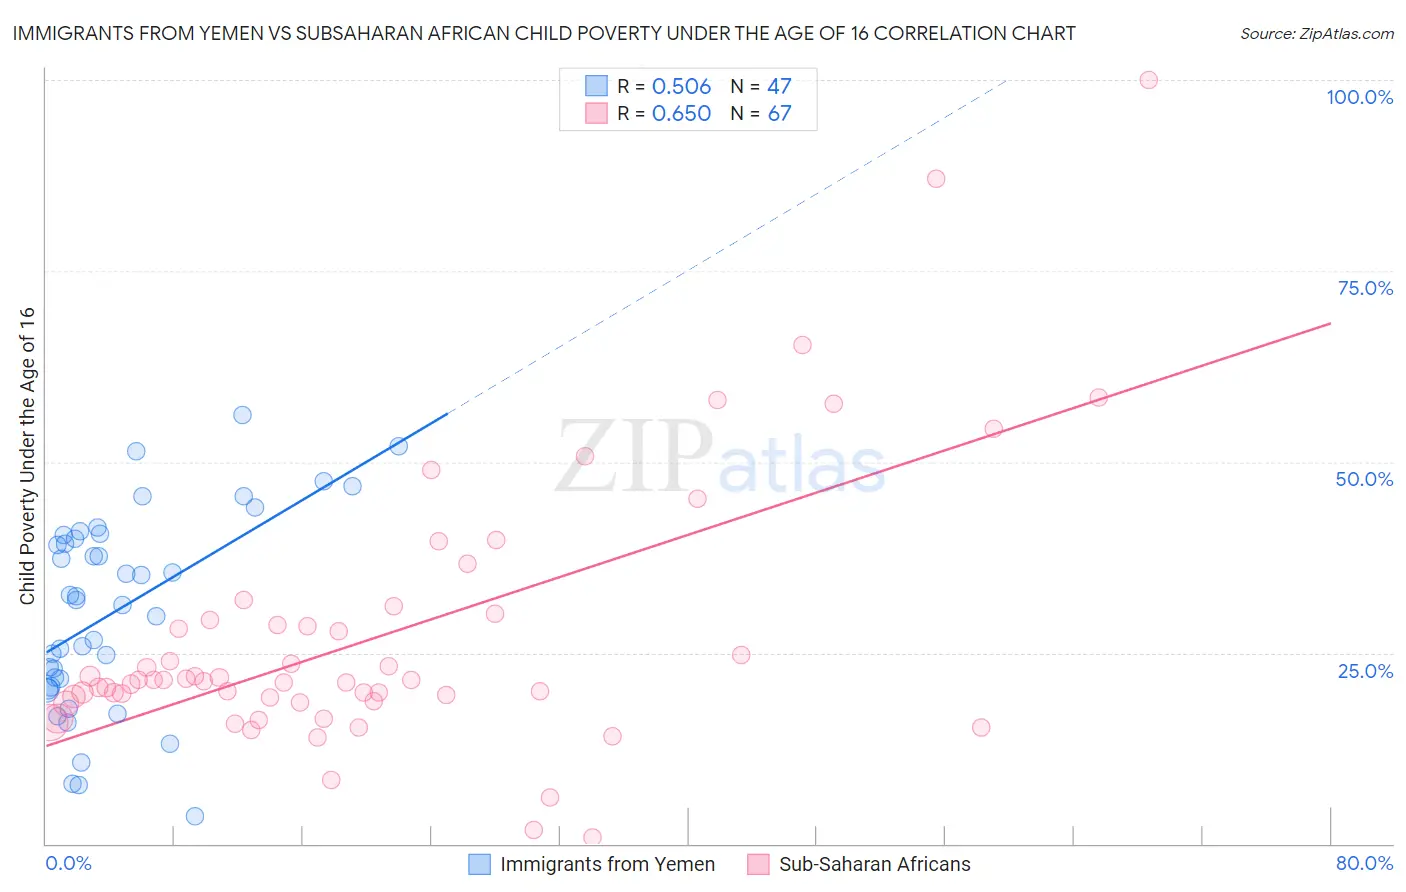 Immigrants from Yemen vs Subsaharan African Child Poverty Under the Age of 16